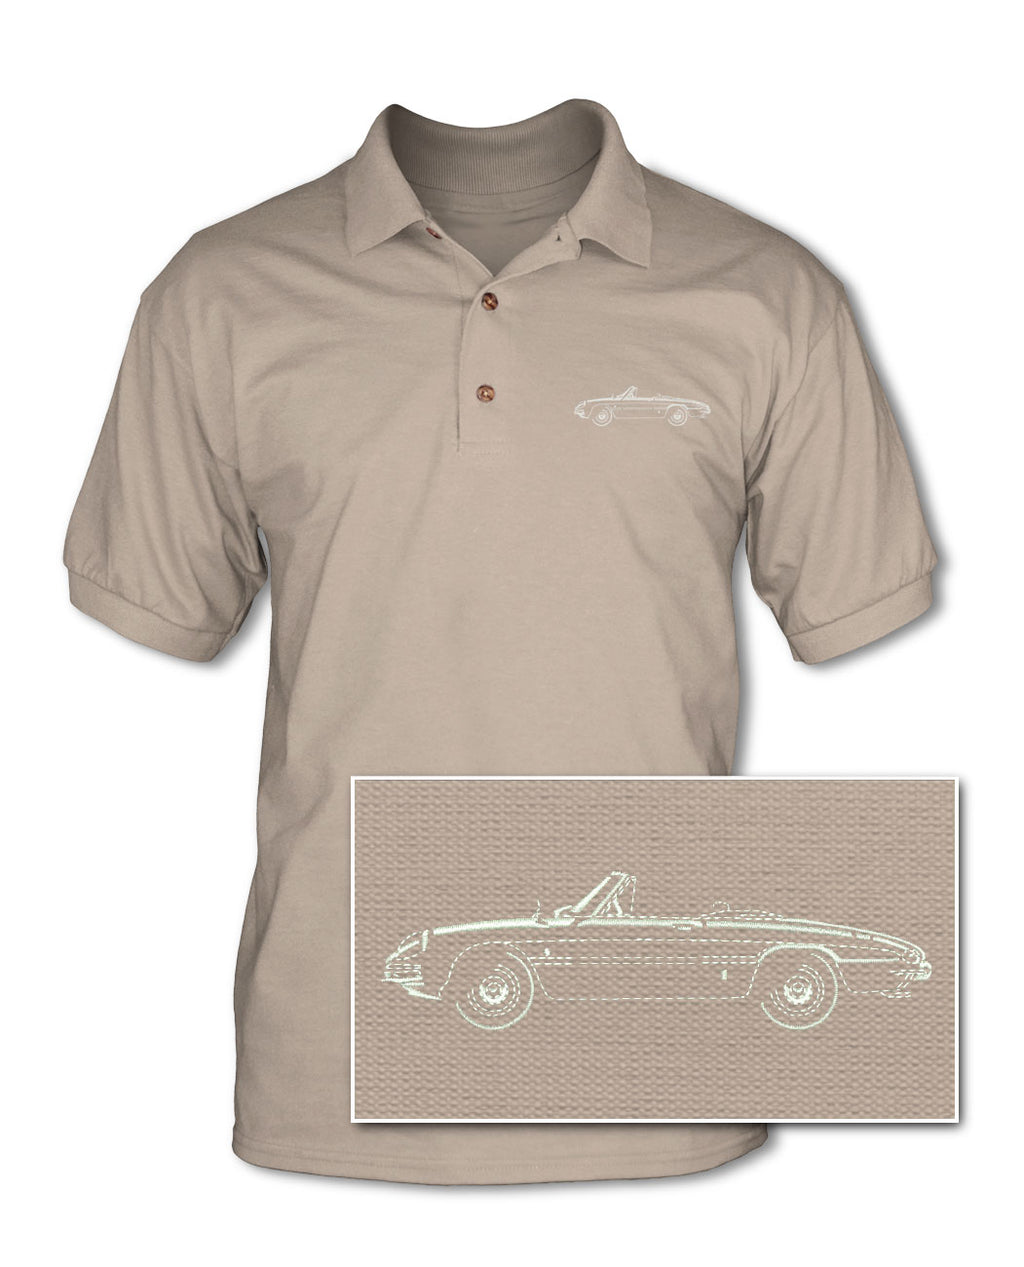 Alfa Romeo Spider Veloce Convertible Duetto 1966 - 1969 Adult Pique Polo Shirt - Side View